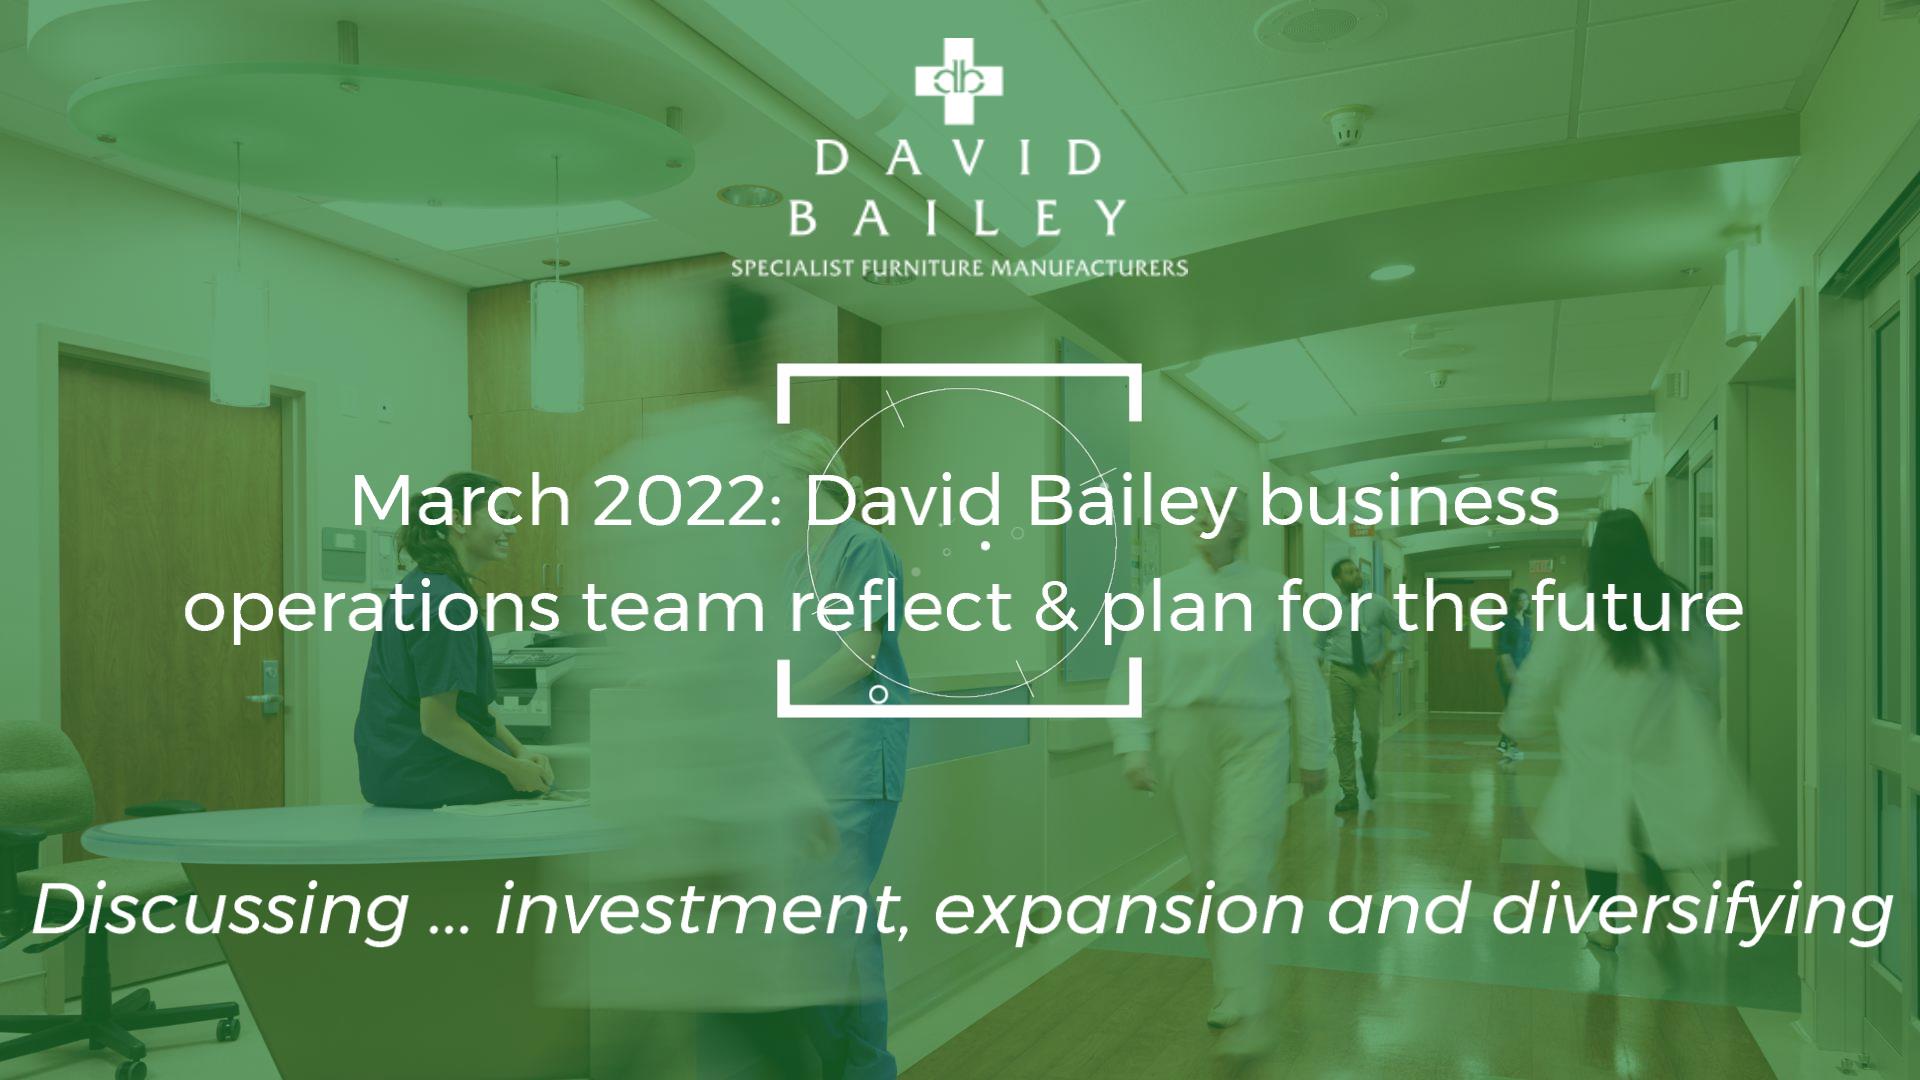 David Bailey investment, expansion and diversifying